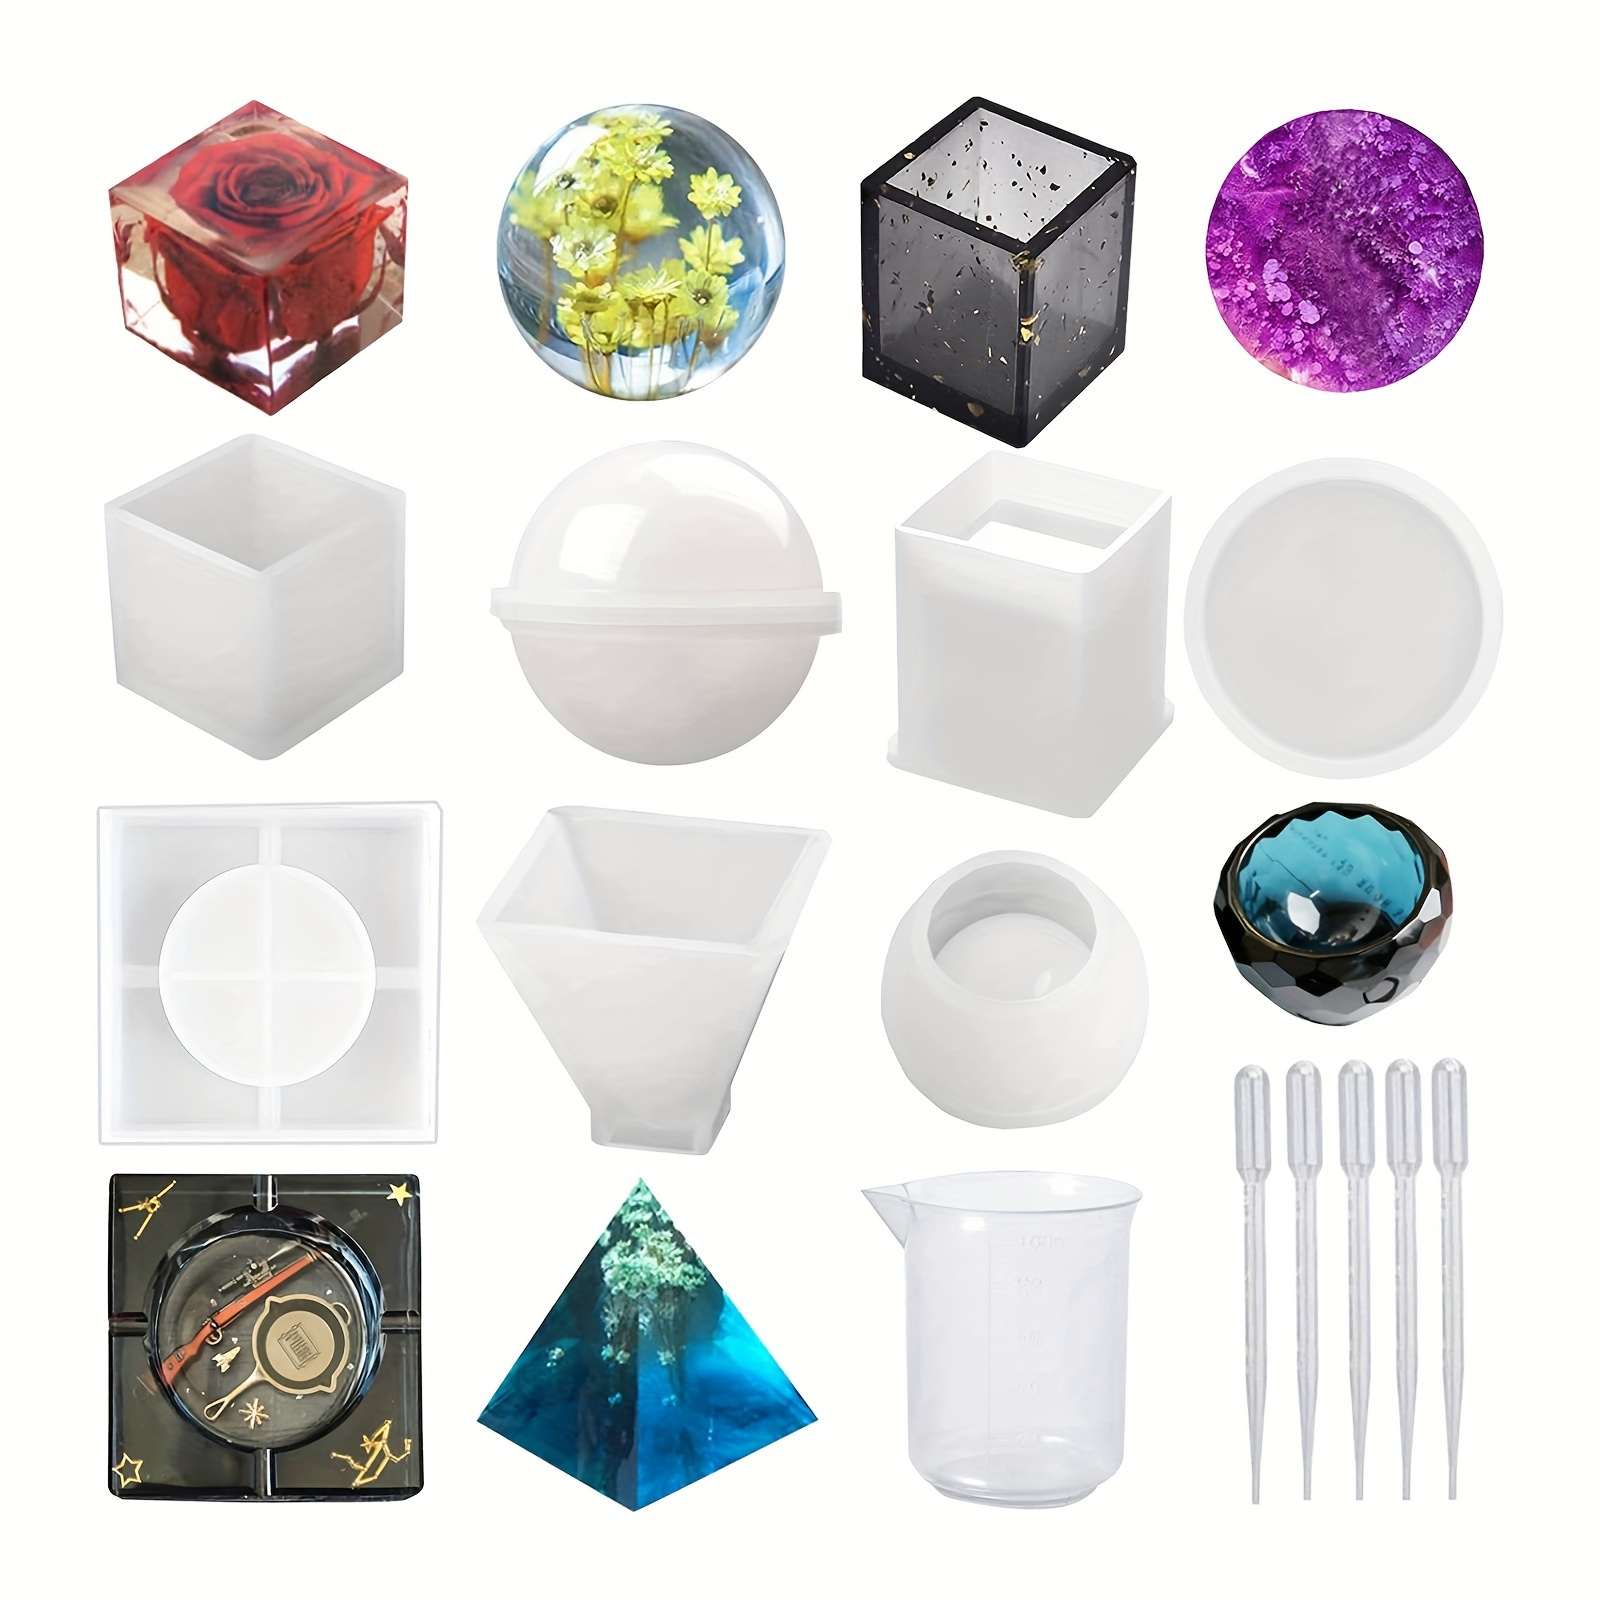 Resin Molds Silicone Kit 20Pcs,Epoxy Resin Molds Including  Sphere,Cube,Pyramid,Square,Round, Used for Create Art,DIY,Ash  Trays,Coasters,Candles.Bonus